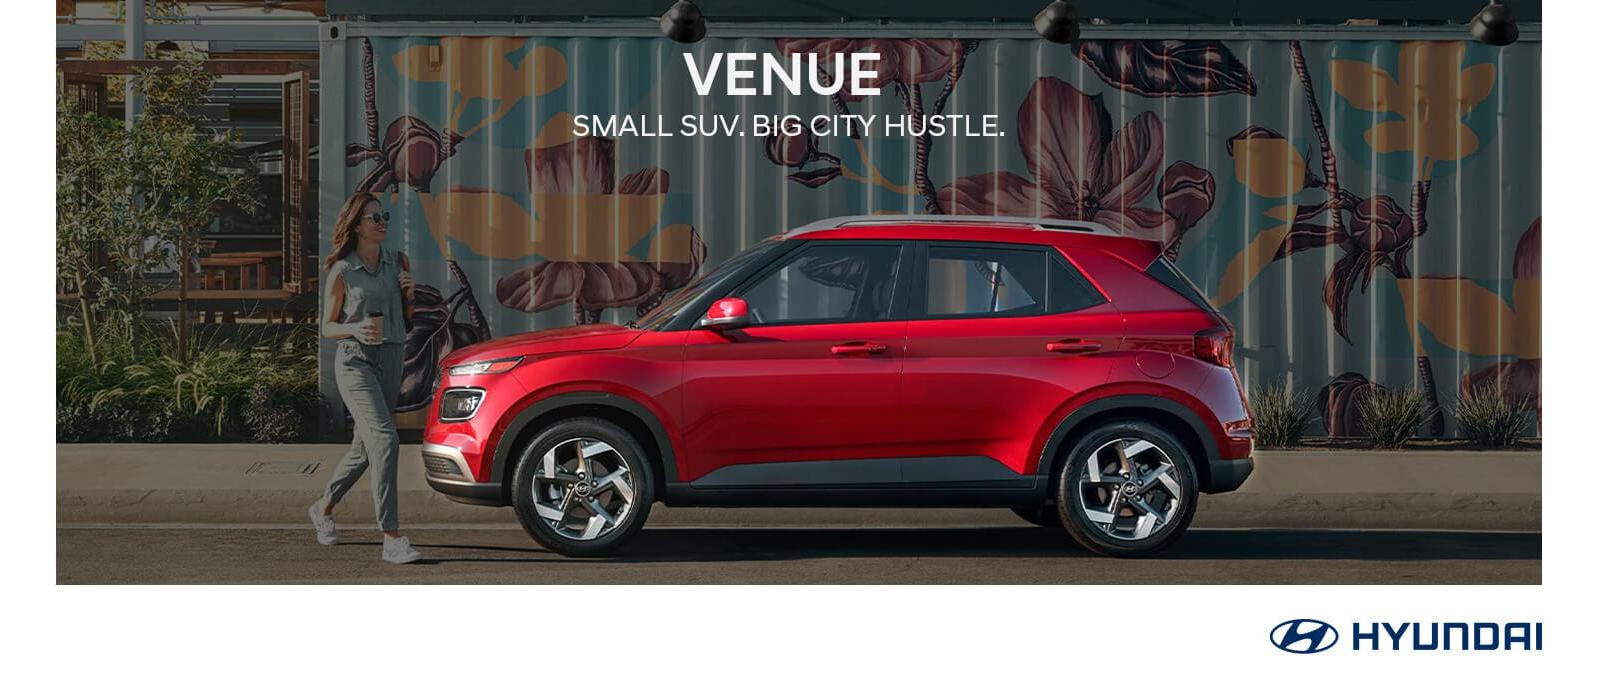 Red 2023 Hyundai Venue parked with graffiti in background.